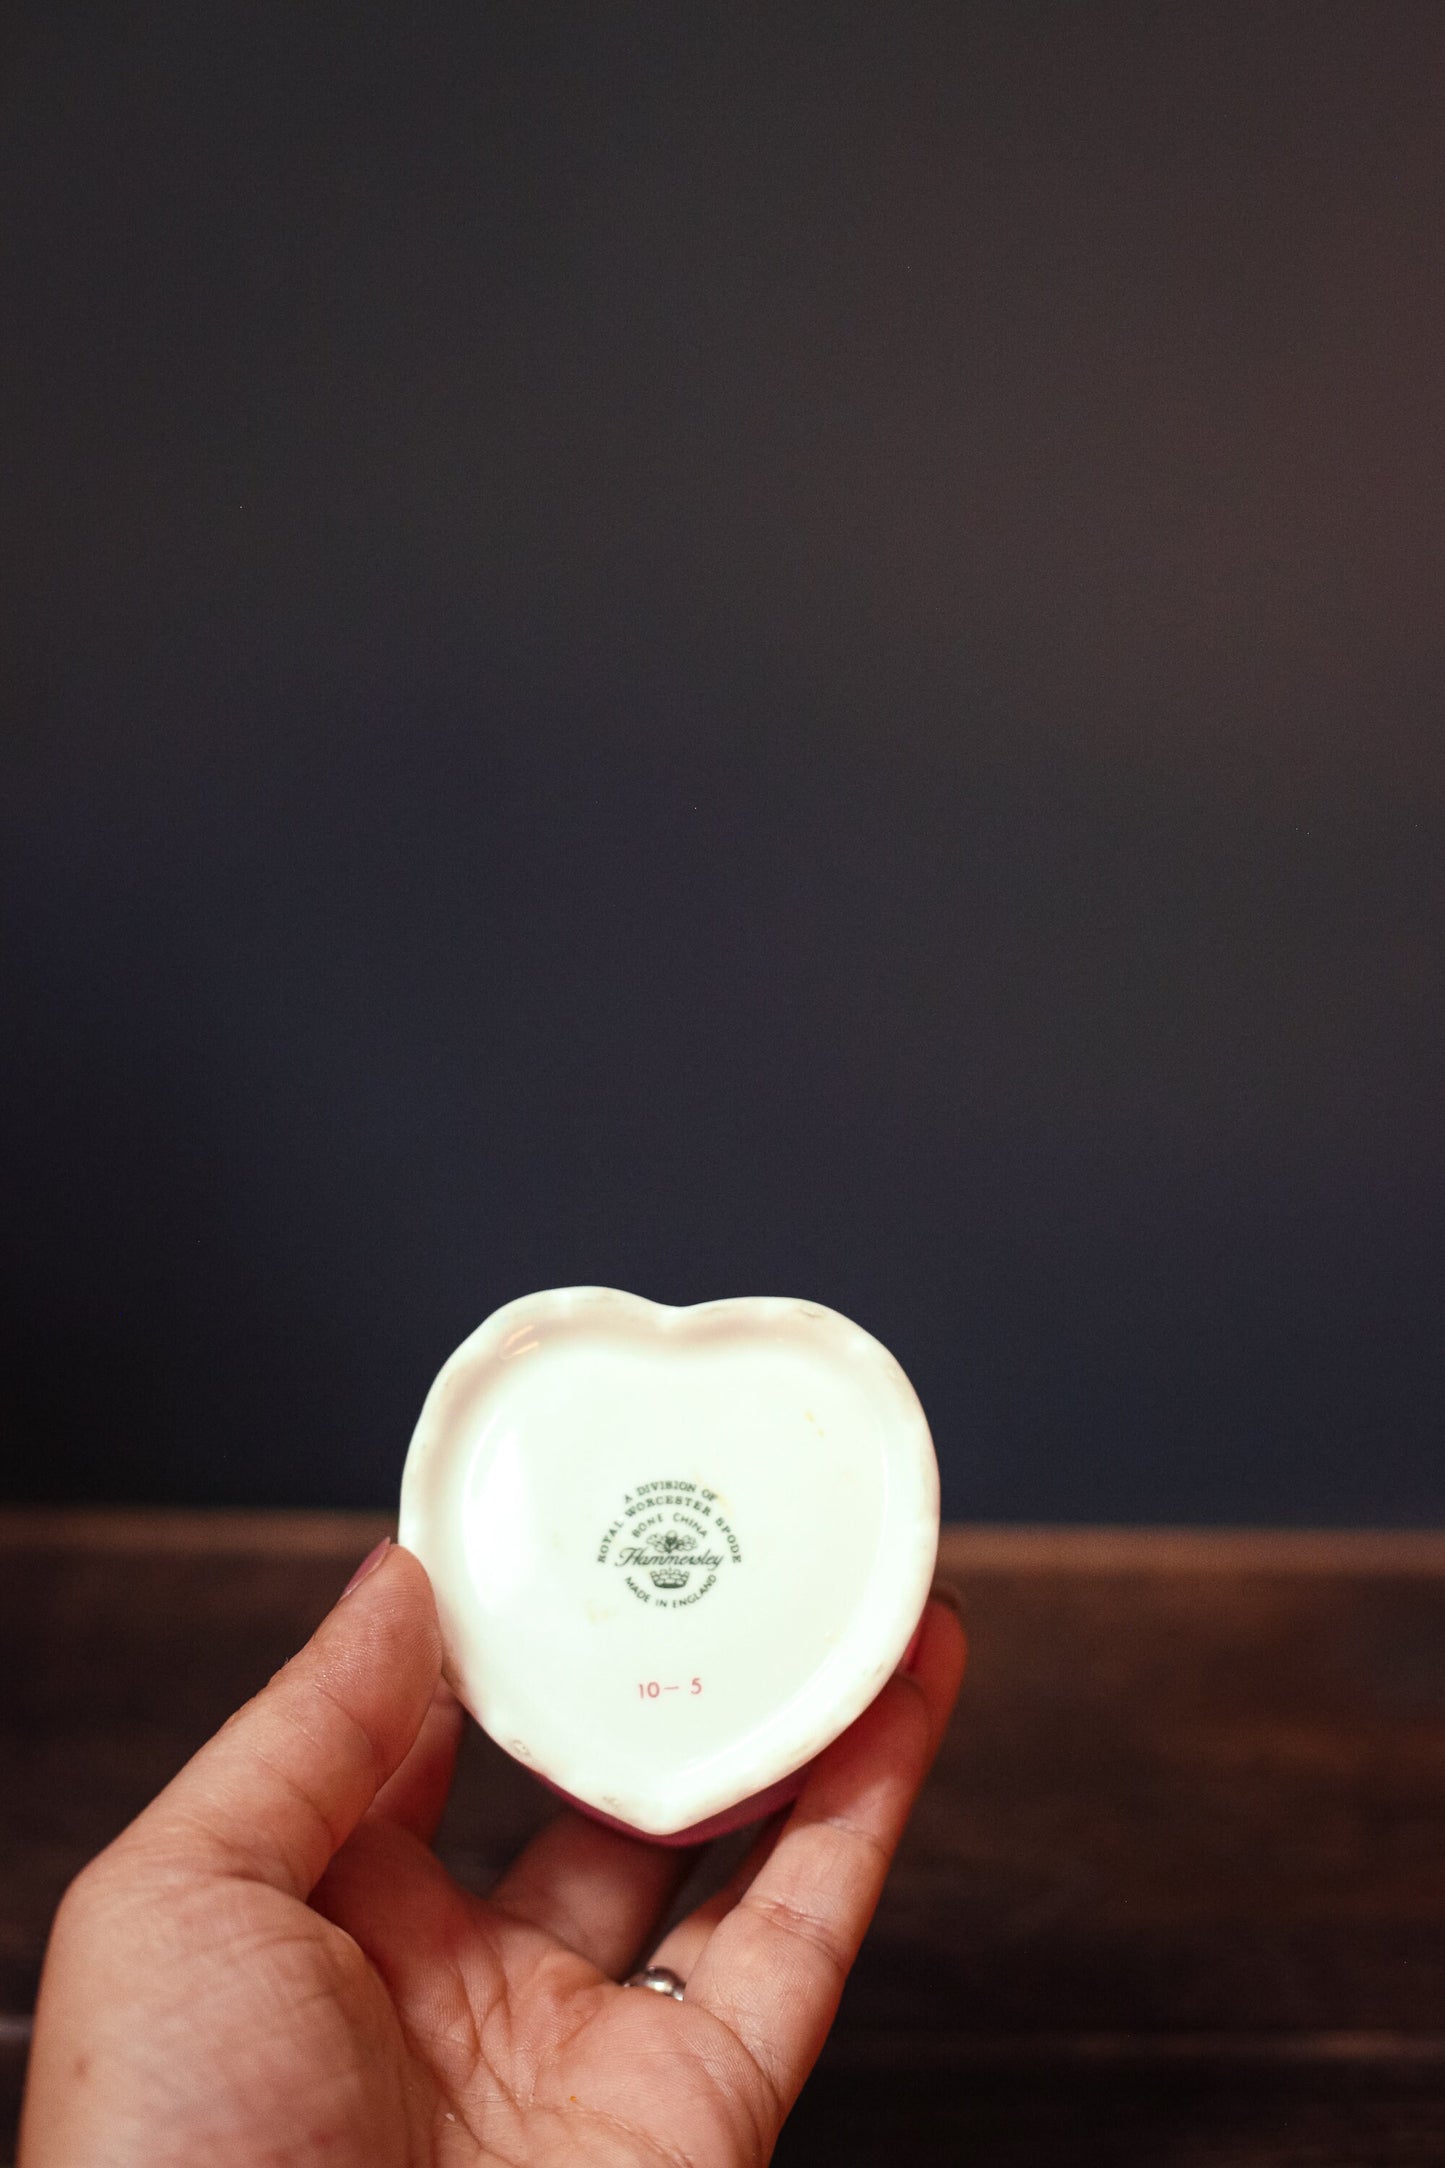 Rose Printed Heart Shaped Porcelain Lidded Ring Dish - Heart Jewelry Box